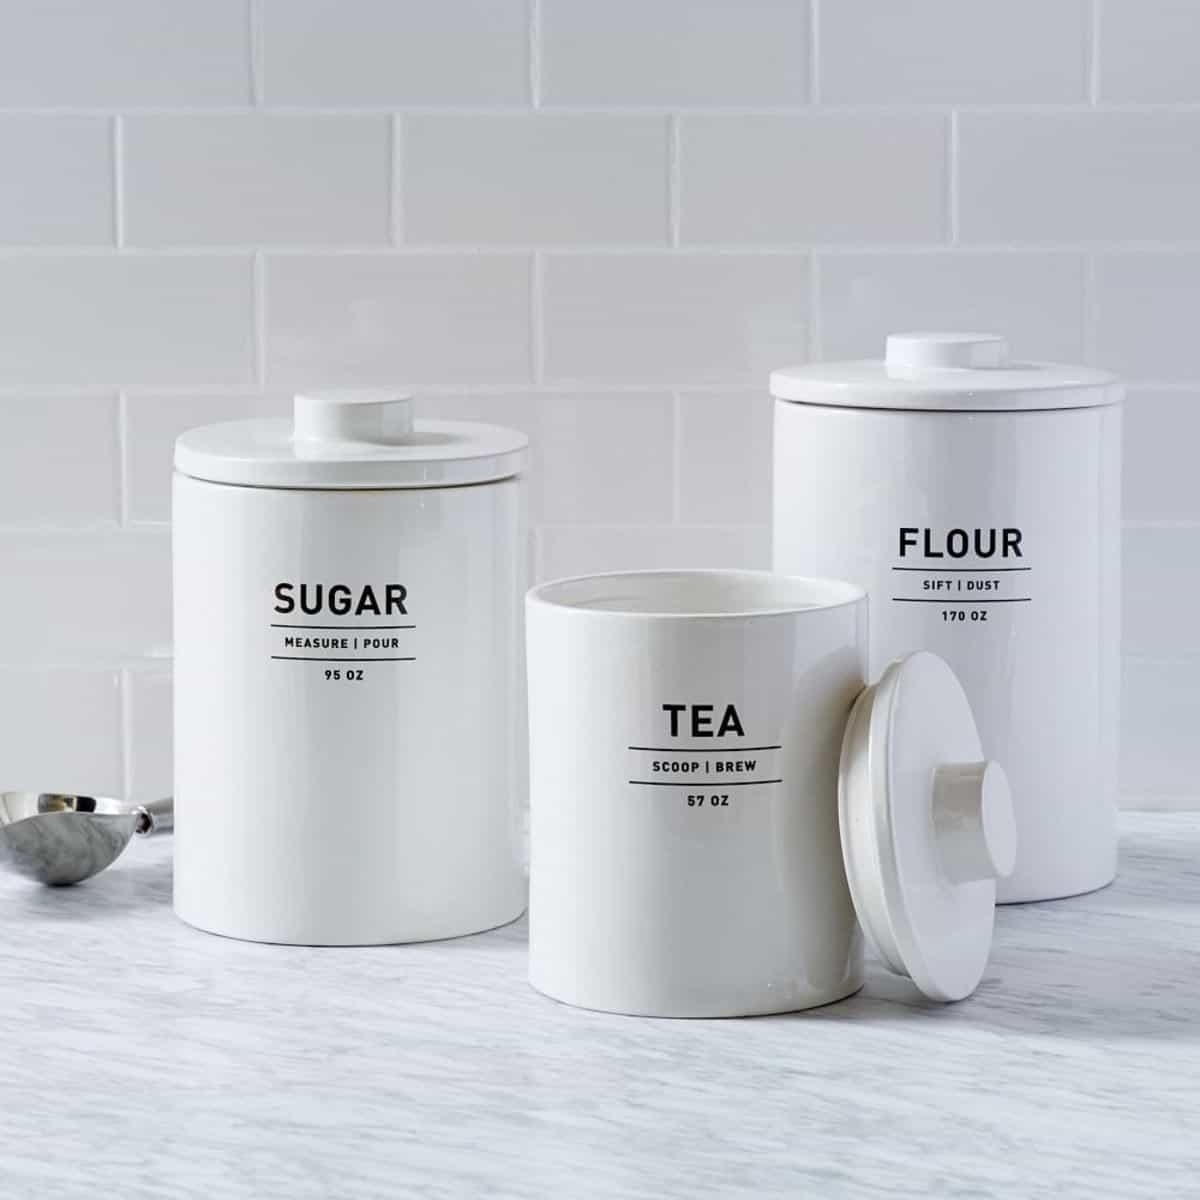 What to put in kitchen canisters